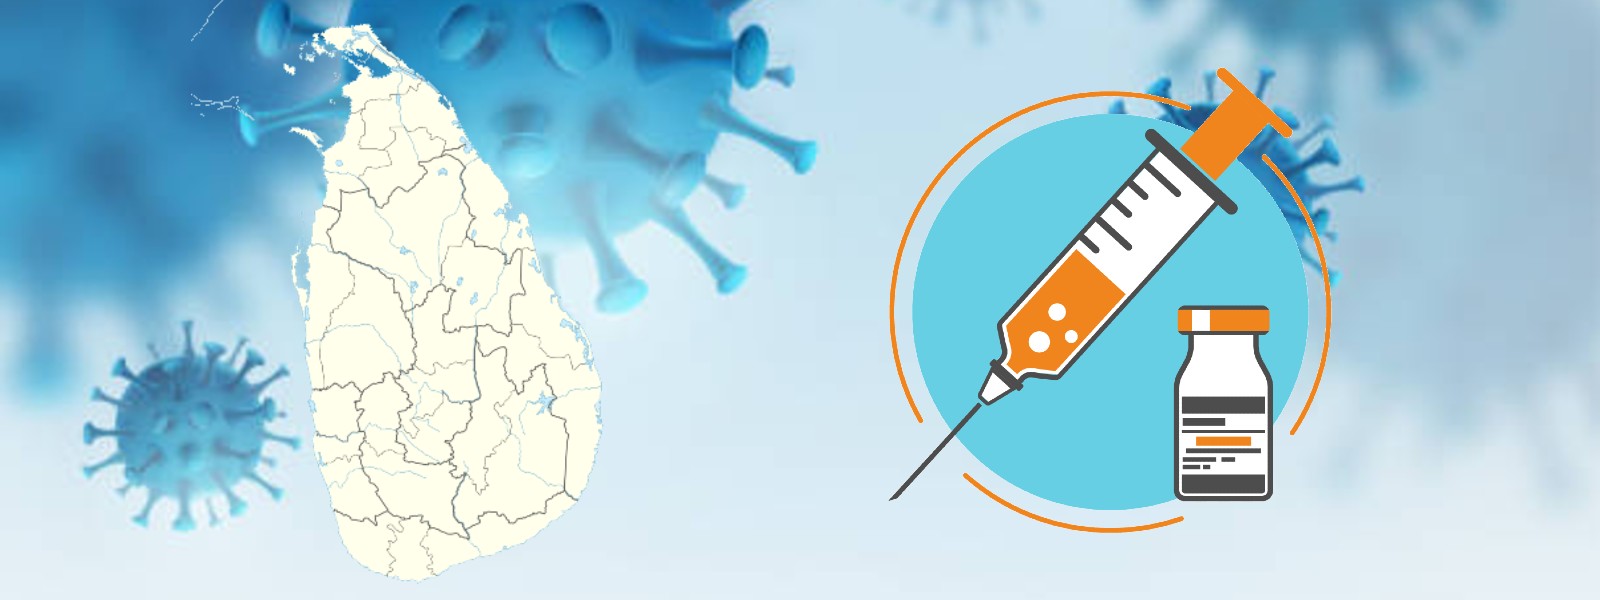 Sri Lanka lifts mandatory requirement of Covid-19 Vaccination Certificate to enter the country